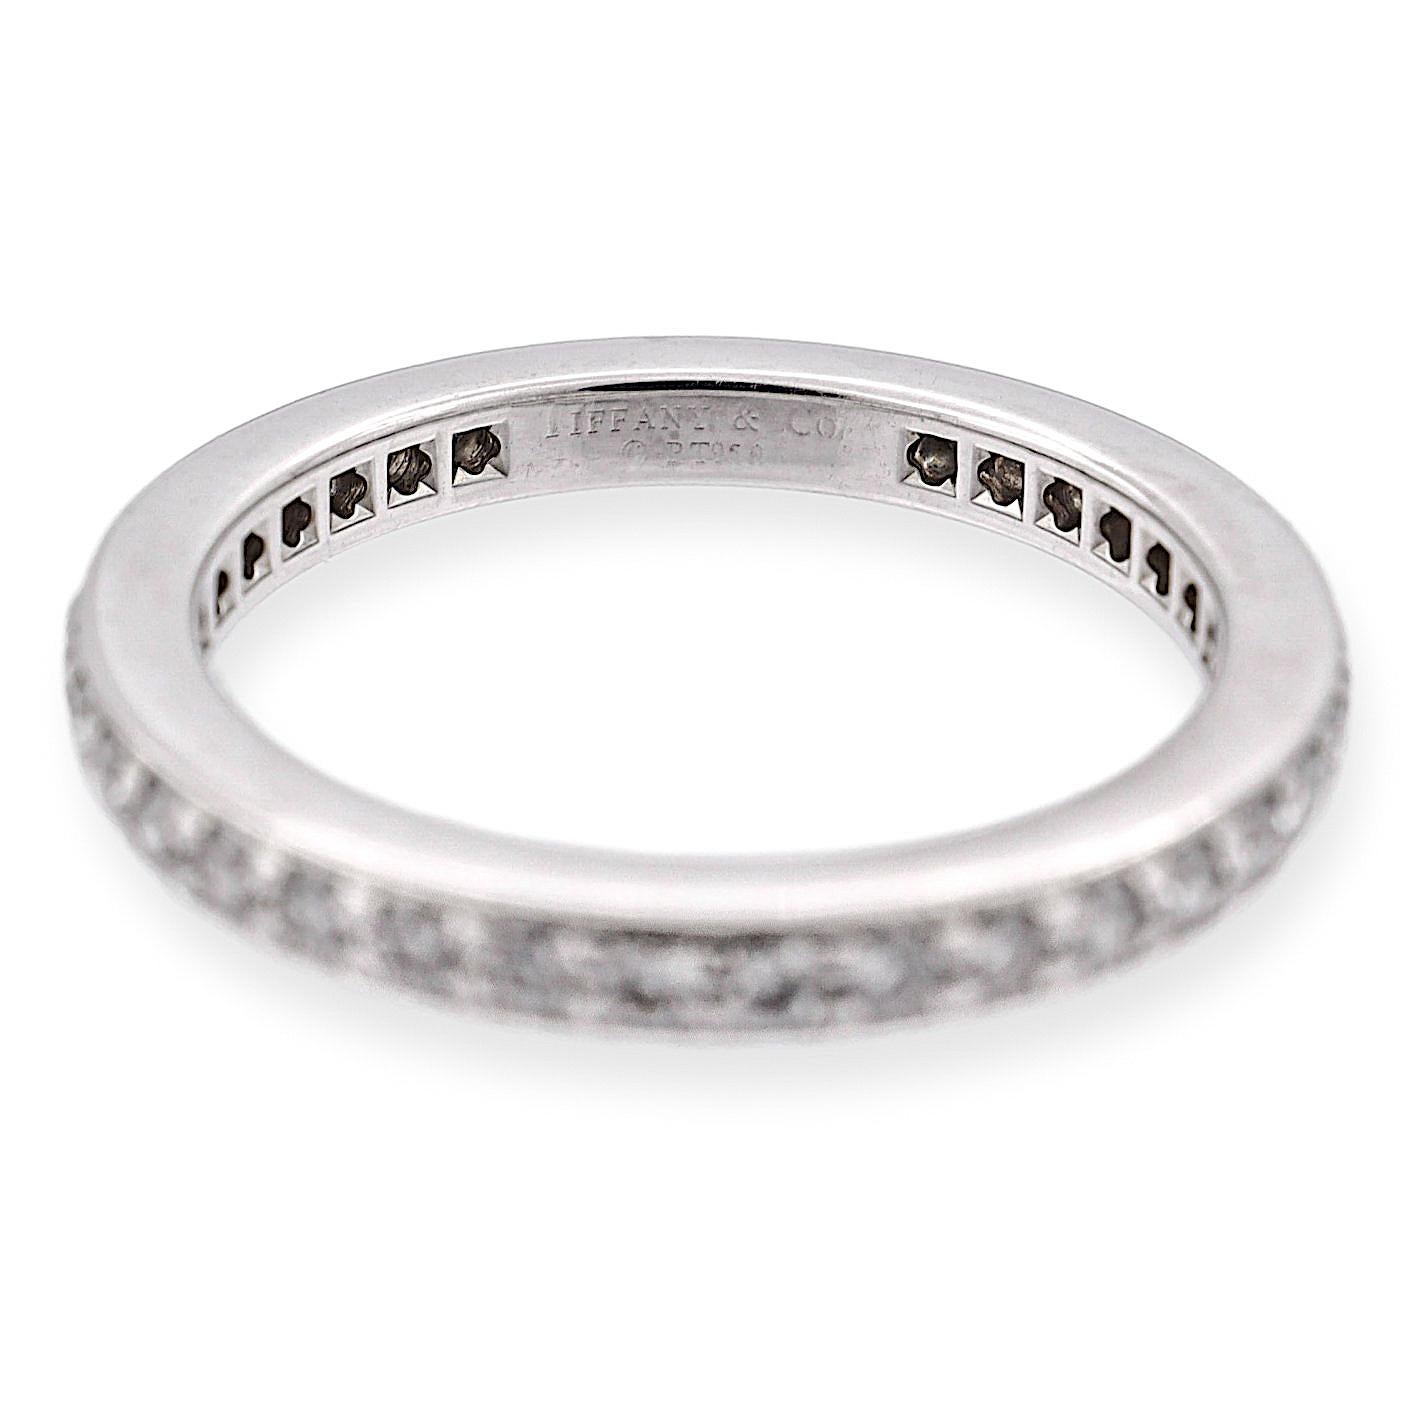 Tiffany & Co. Together Eternity Band, a true testament to timeless elegance and impeccable craftsmanship. This captivating piece features a full circle of round brilliant cut diamonds, meticulously bead set within a mil-grain edge channel, resulting